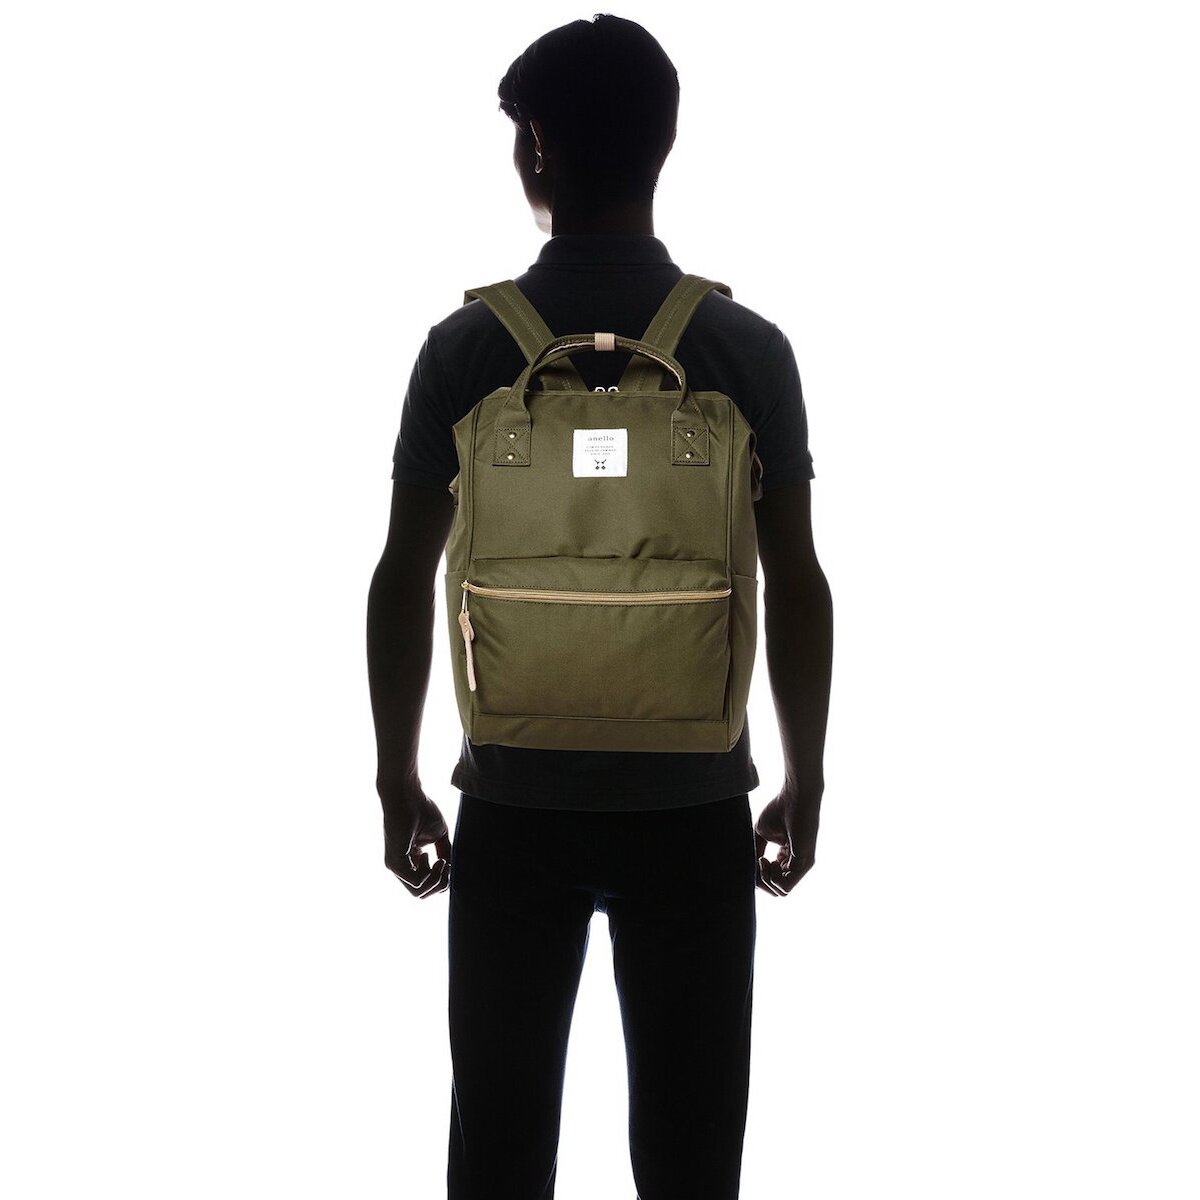 What Fits in a Small Anello Backpack? 